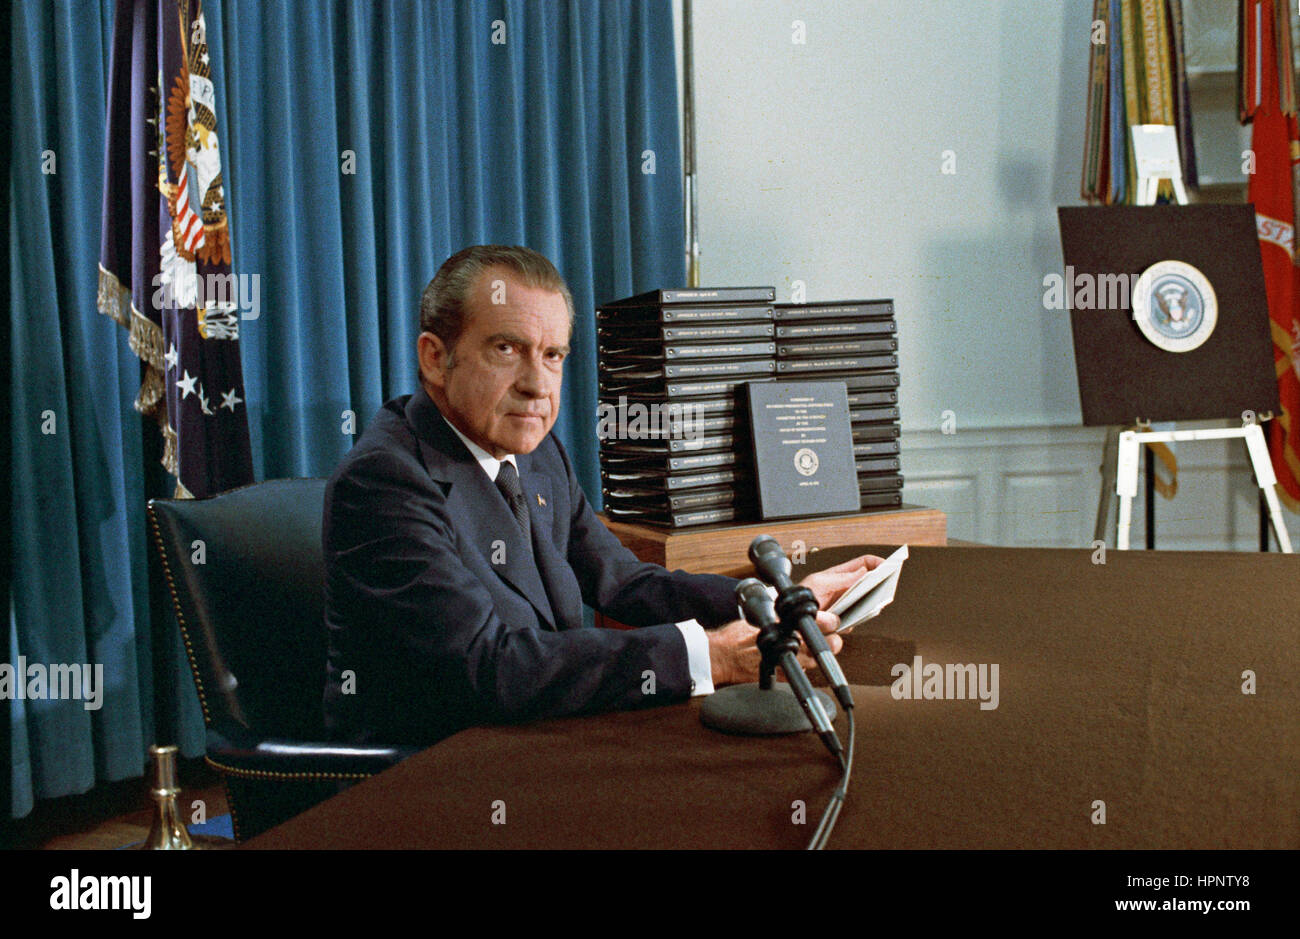 PRESIDENT RICHARD NIXON (1913-1994) with his edited transcripts of the White House Tapes subpoenaed by the Special Prosecutor, during his televised speech  on Watergate  on 29 April 1974. Photo: White House official Stock Photo